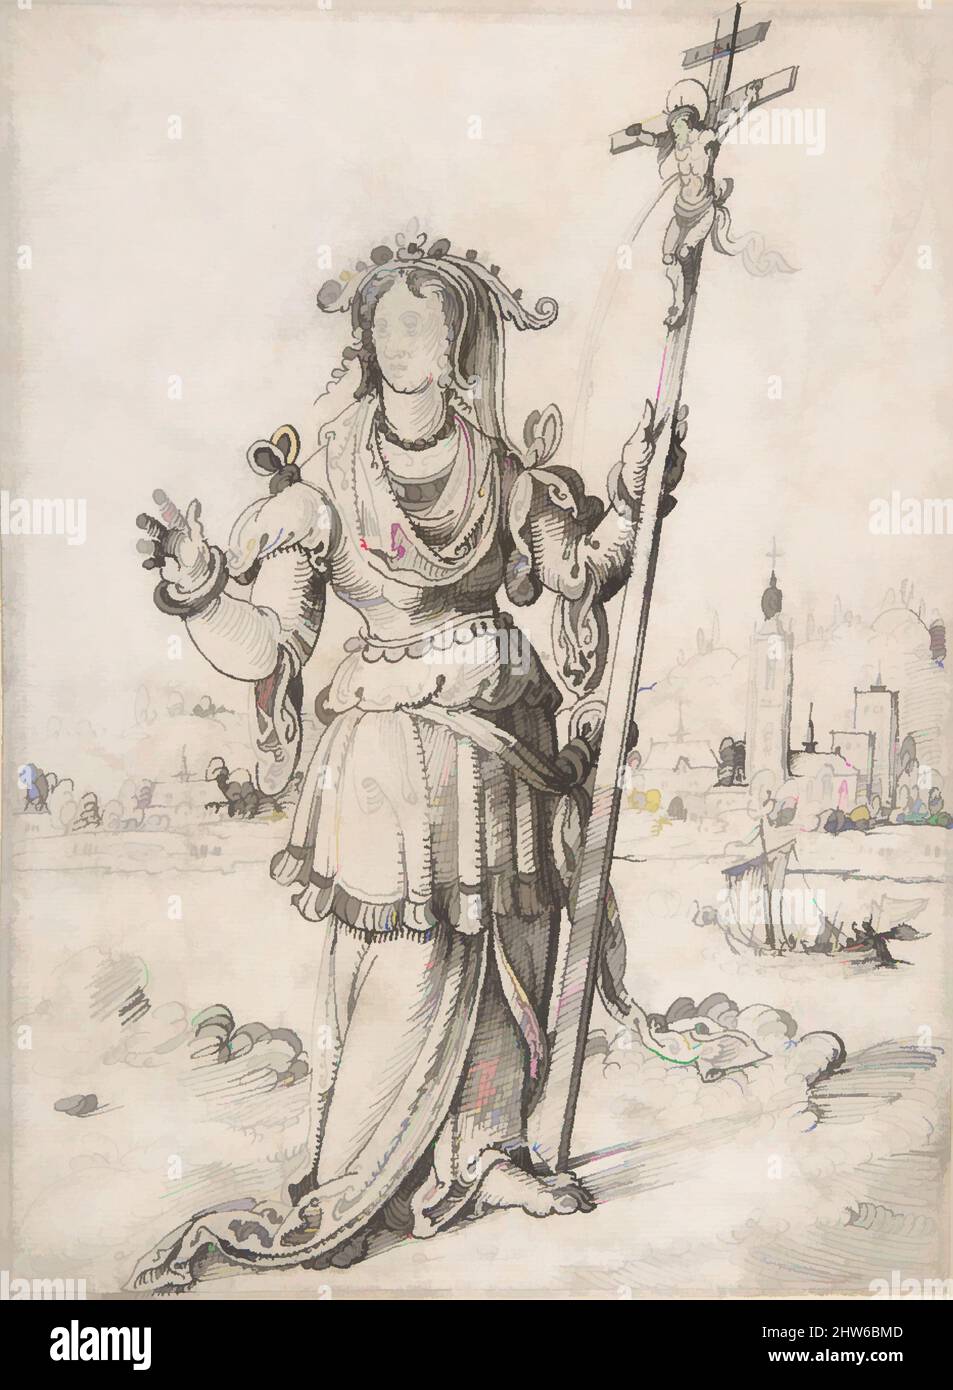 Art inspired by Allegorical Figure (Faith?), early 16th–mid 16th century, Pen and brown ink. Framing line in black chalk (left, right and upper edge) and pen and grey ink (lower edge), possibly by the artist., sheet: 9 5/16 x 6 3/4 in. (23.6 x 17.1 cm), Drawings, Pieter Cornelisz Kunst, Classic works modernized by Artotop with a splash of modernity. Shapes, color and value, eye-catching visual impact on art. Emotions through freedom of artworks in a contemporary way. A timeless message pursuing a wildly creative new direction. Artists turning to the digital medium and creating the Artotop NFT Stock Photo